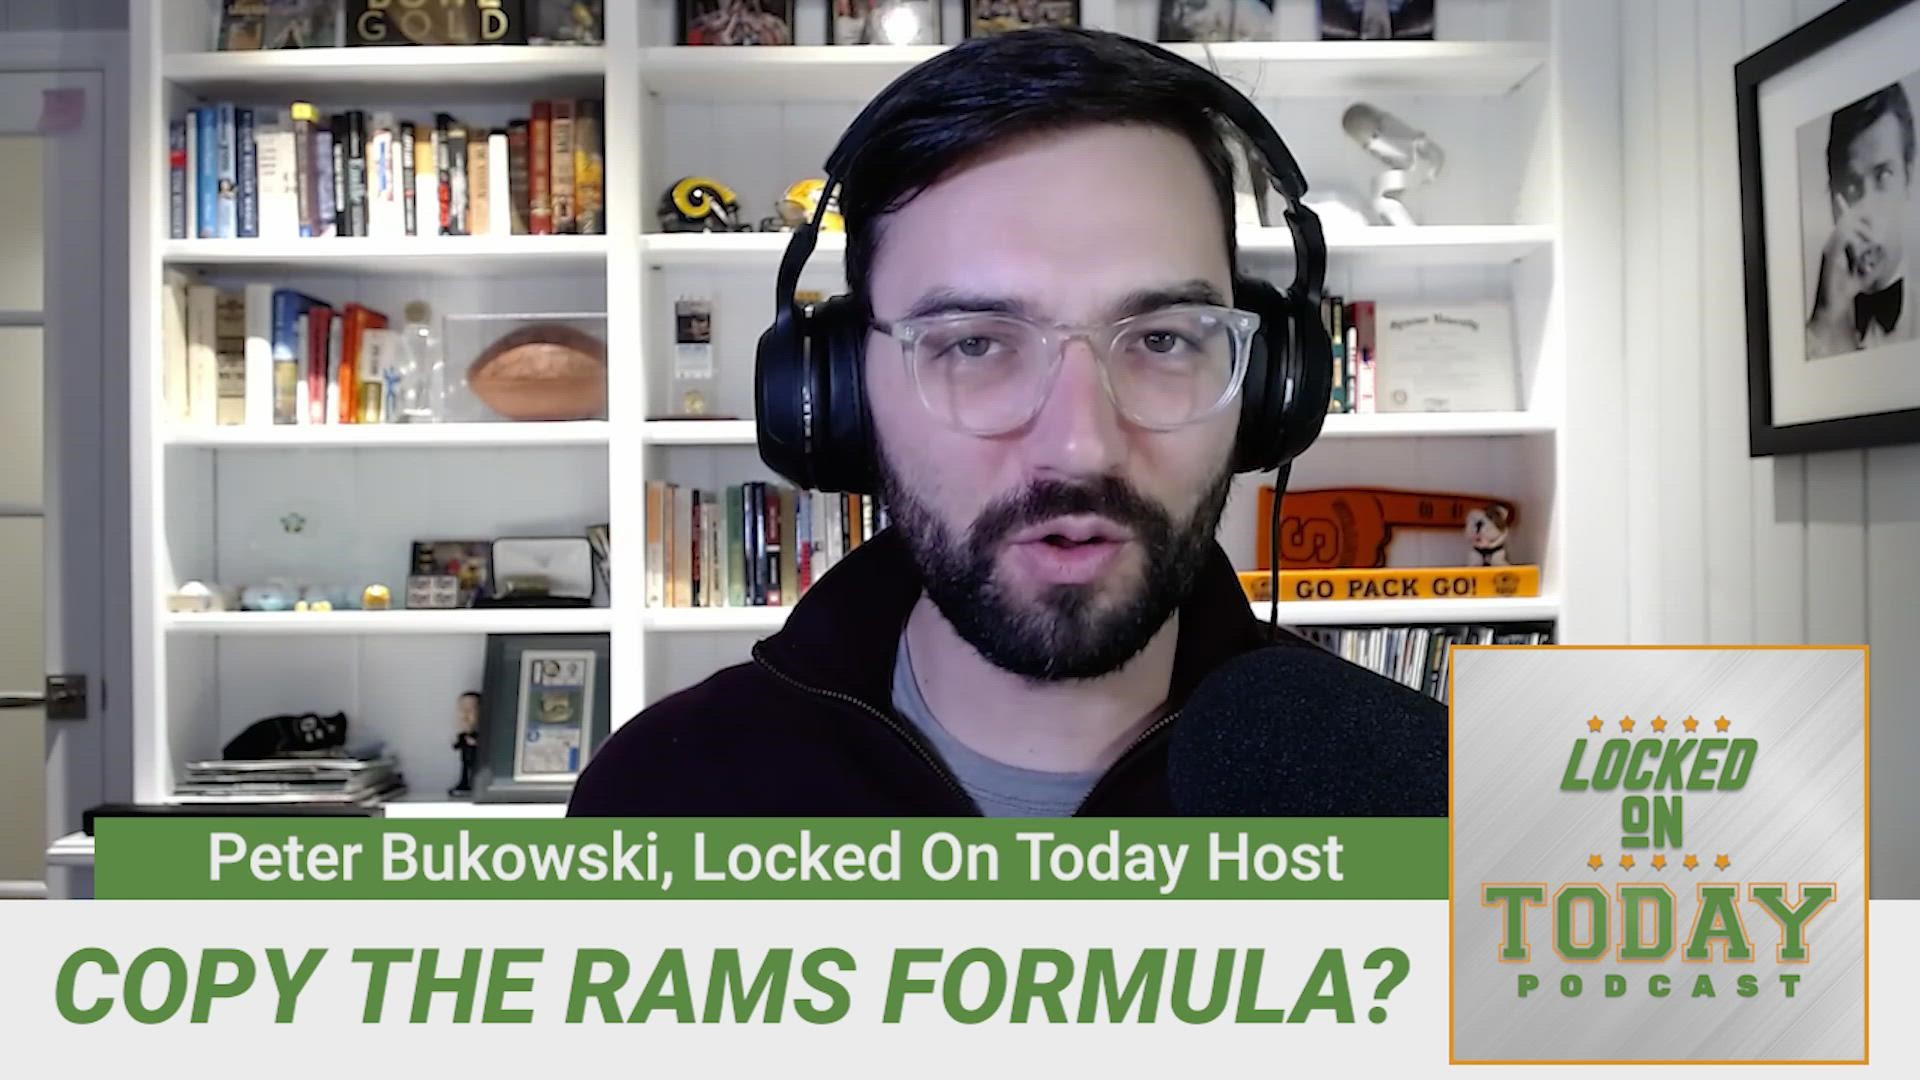 Ross Jackson joined Peter Bukowski to discuss which NFL teams are in a place to make the same sort of moves the Rams did that propelled them to Super Bowl LVI.